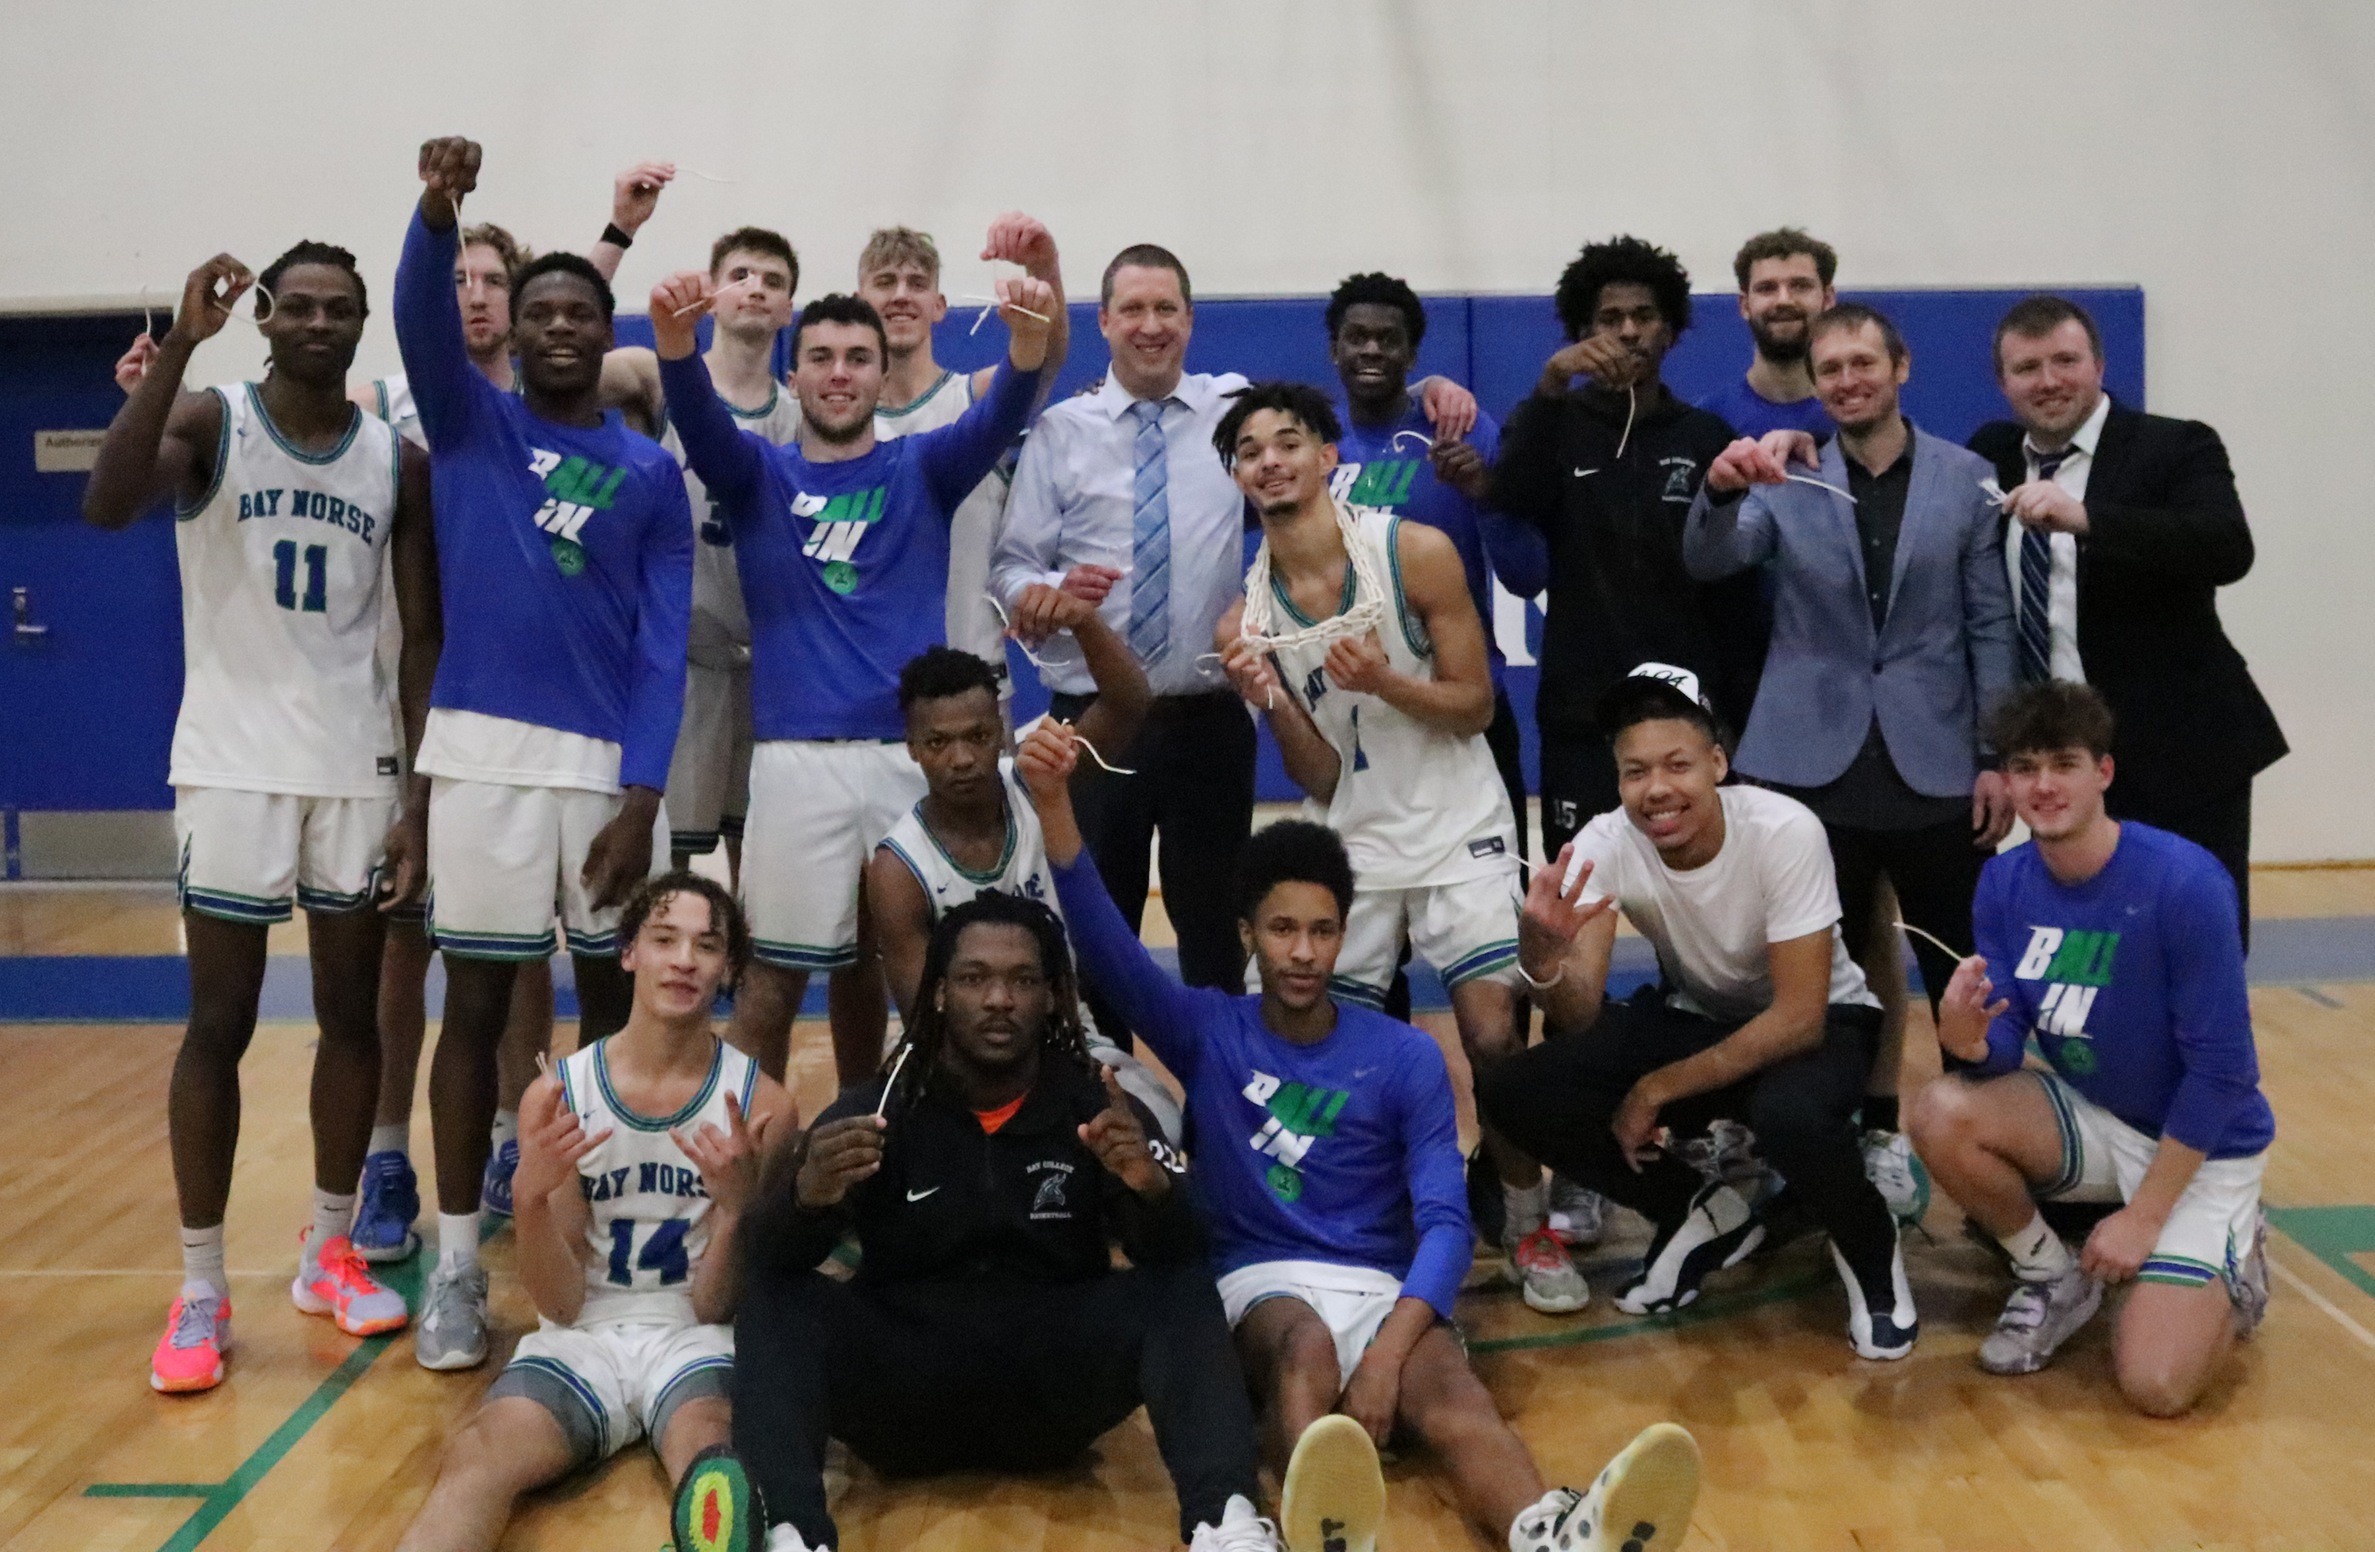 The Bay College Men's Basketball Team pose together after cutting down the net